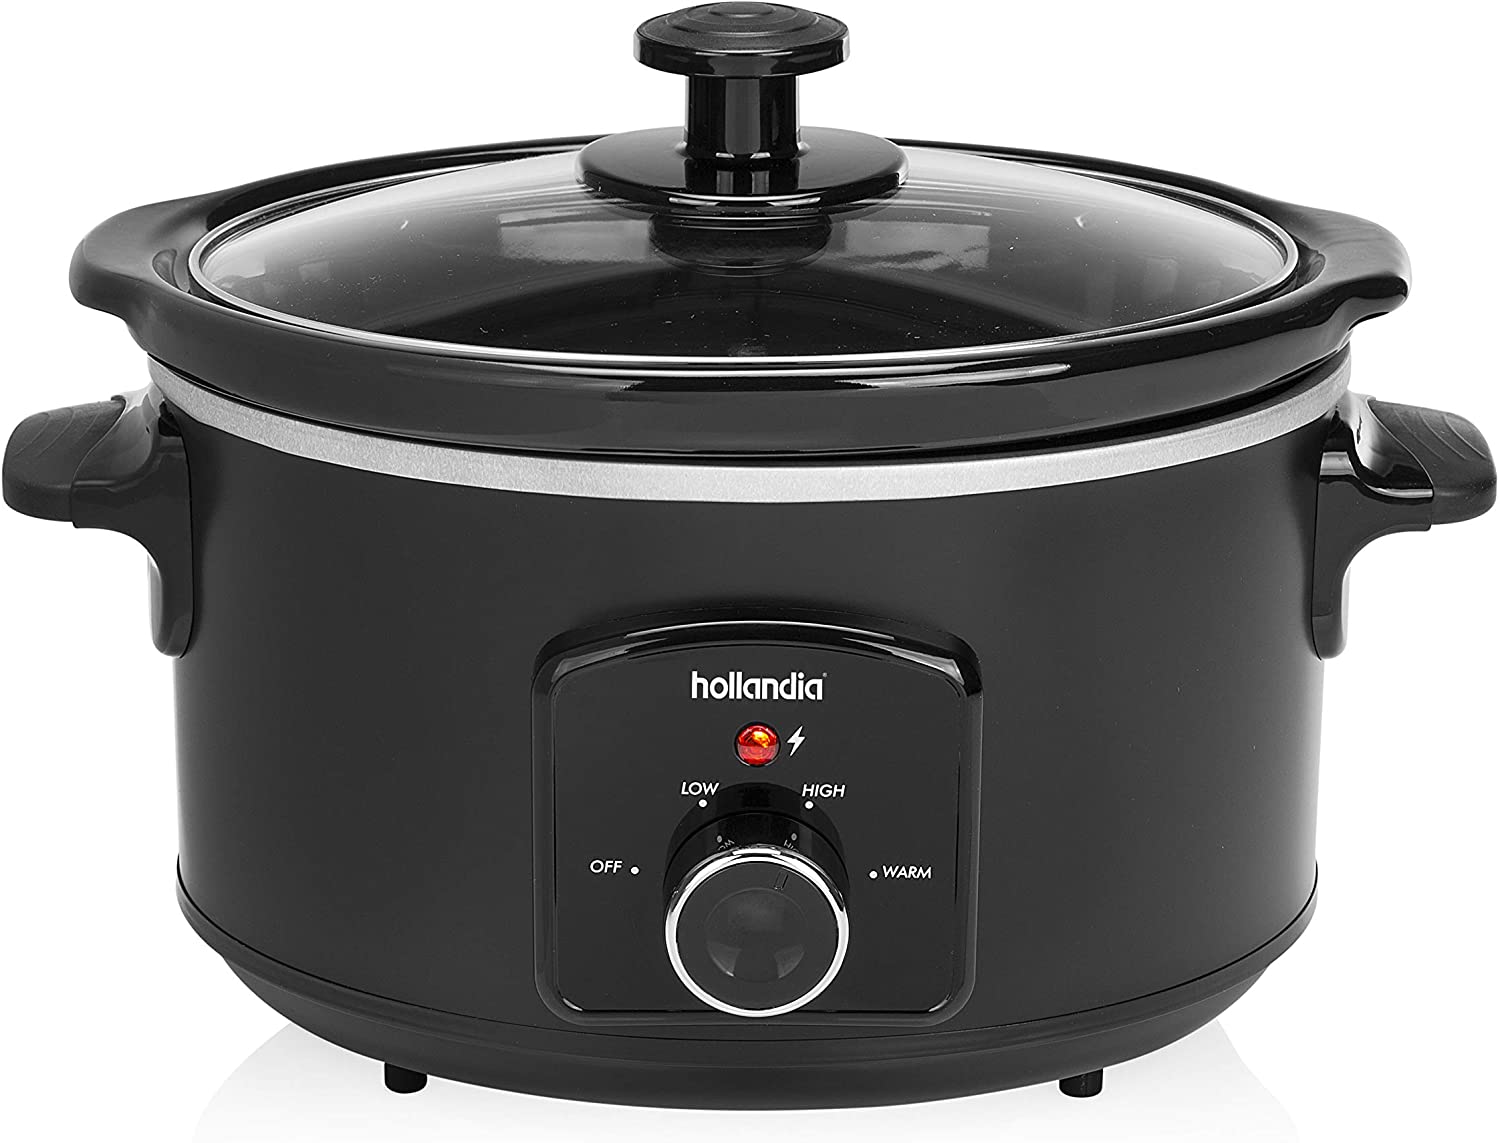 Tristar VS-3915 Slow Cooker (Stainless Steel Ceramic Pot with 2 Heat Settings and Keep Warm Function, 3.5 Litres)